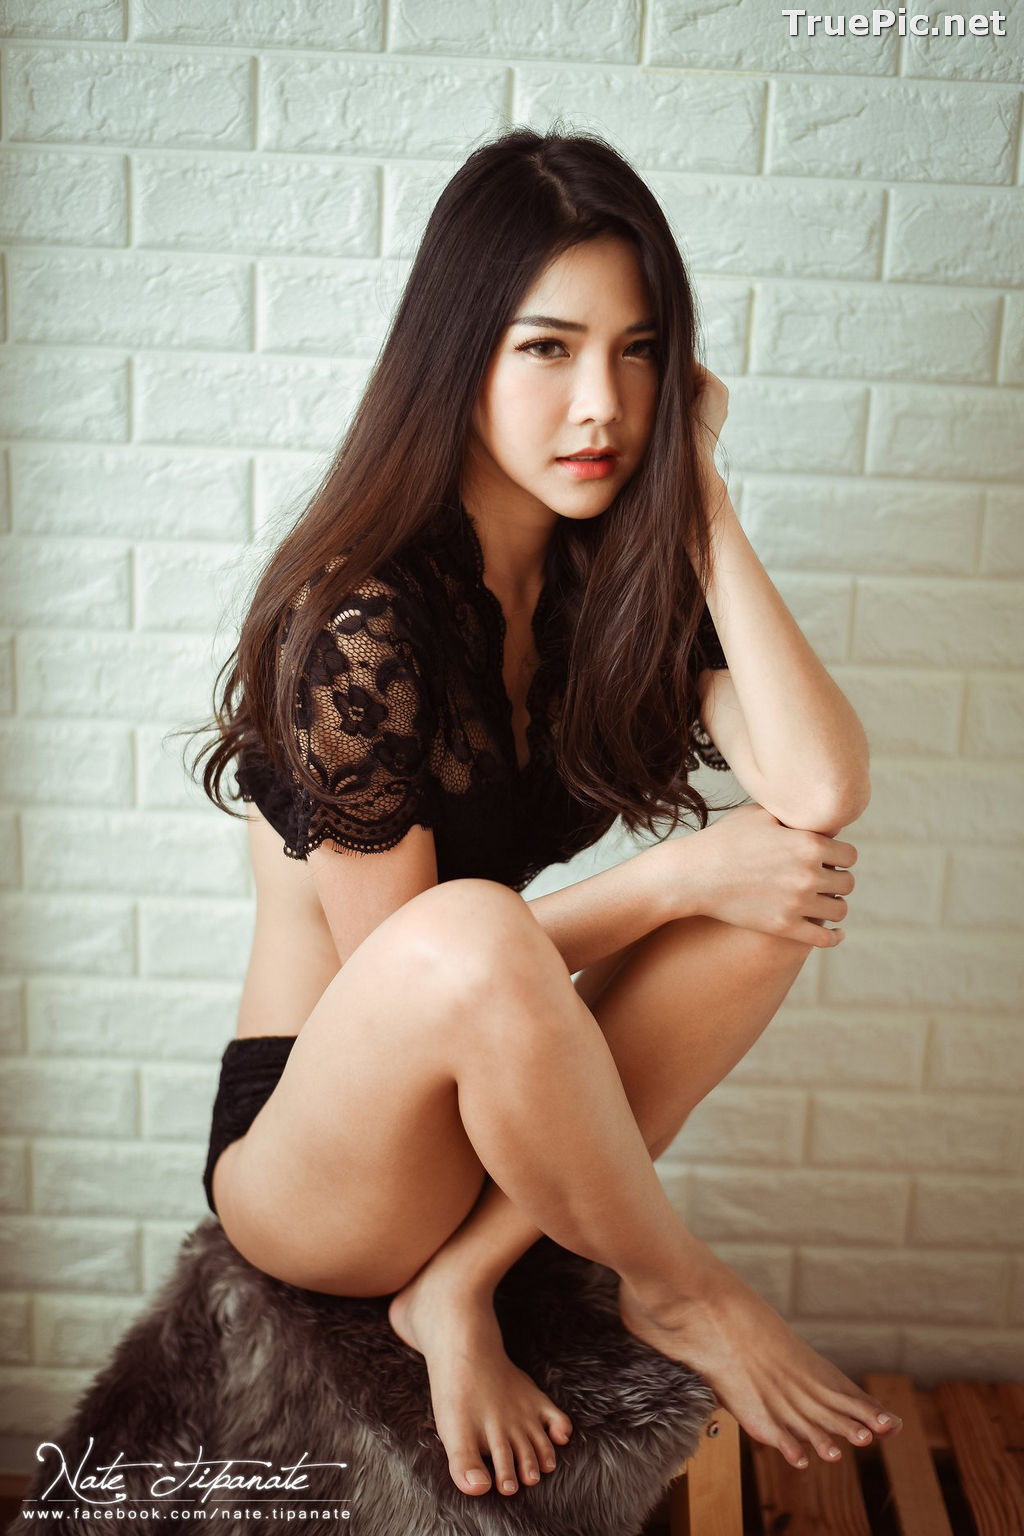 Image Thailand Model - Phitchamol Srijantanet - Black and White Lace Lingerie - TruePic.net - Picture-48